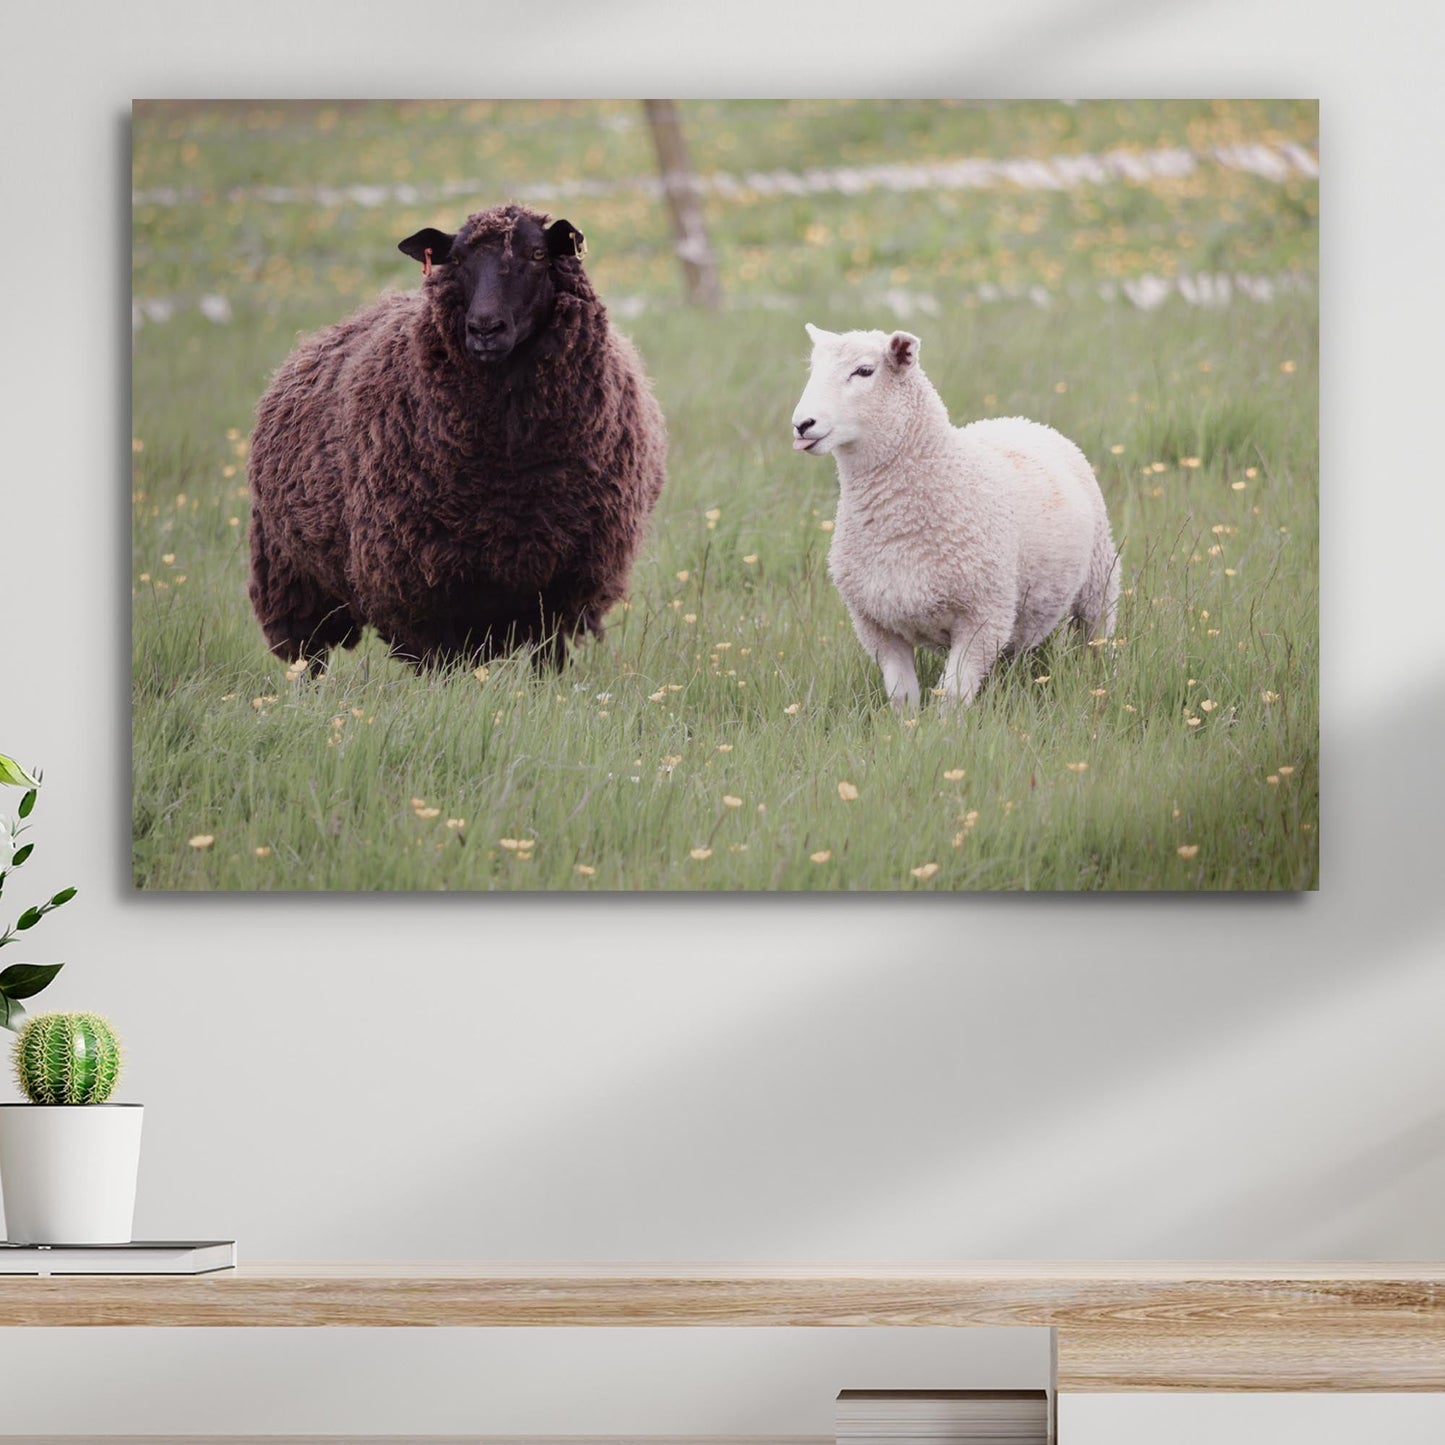 Hello Dally The Sheep Canvas Wall Art - Image by Tailored Canvases